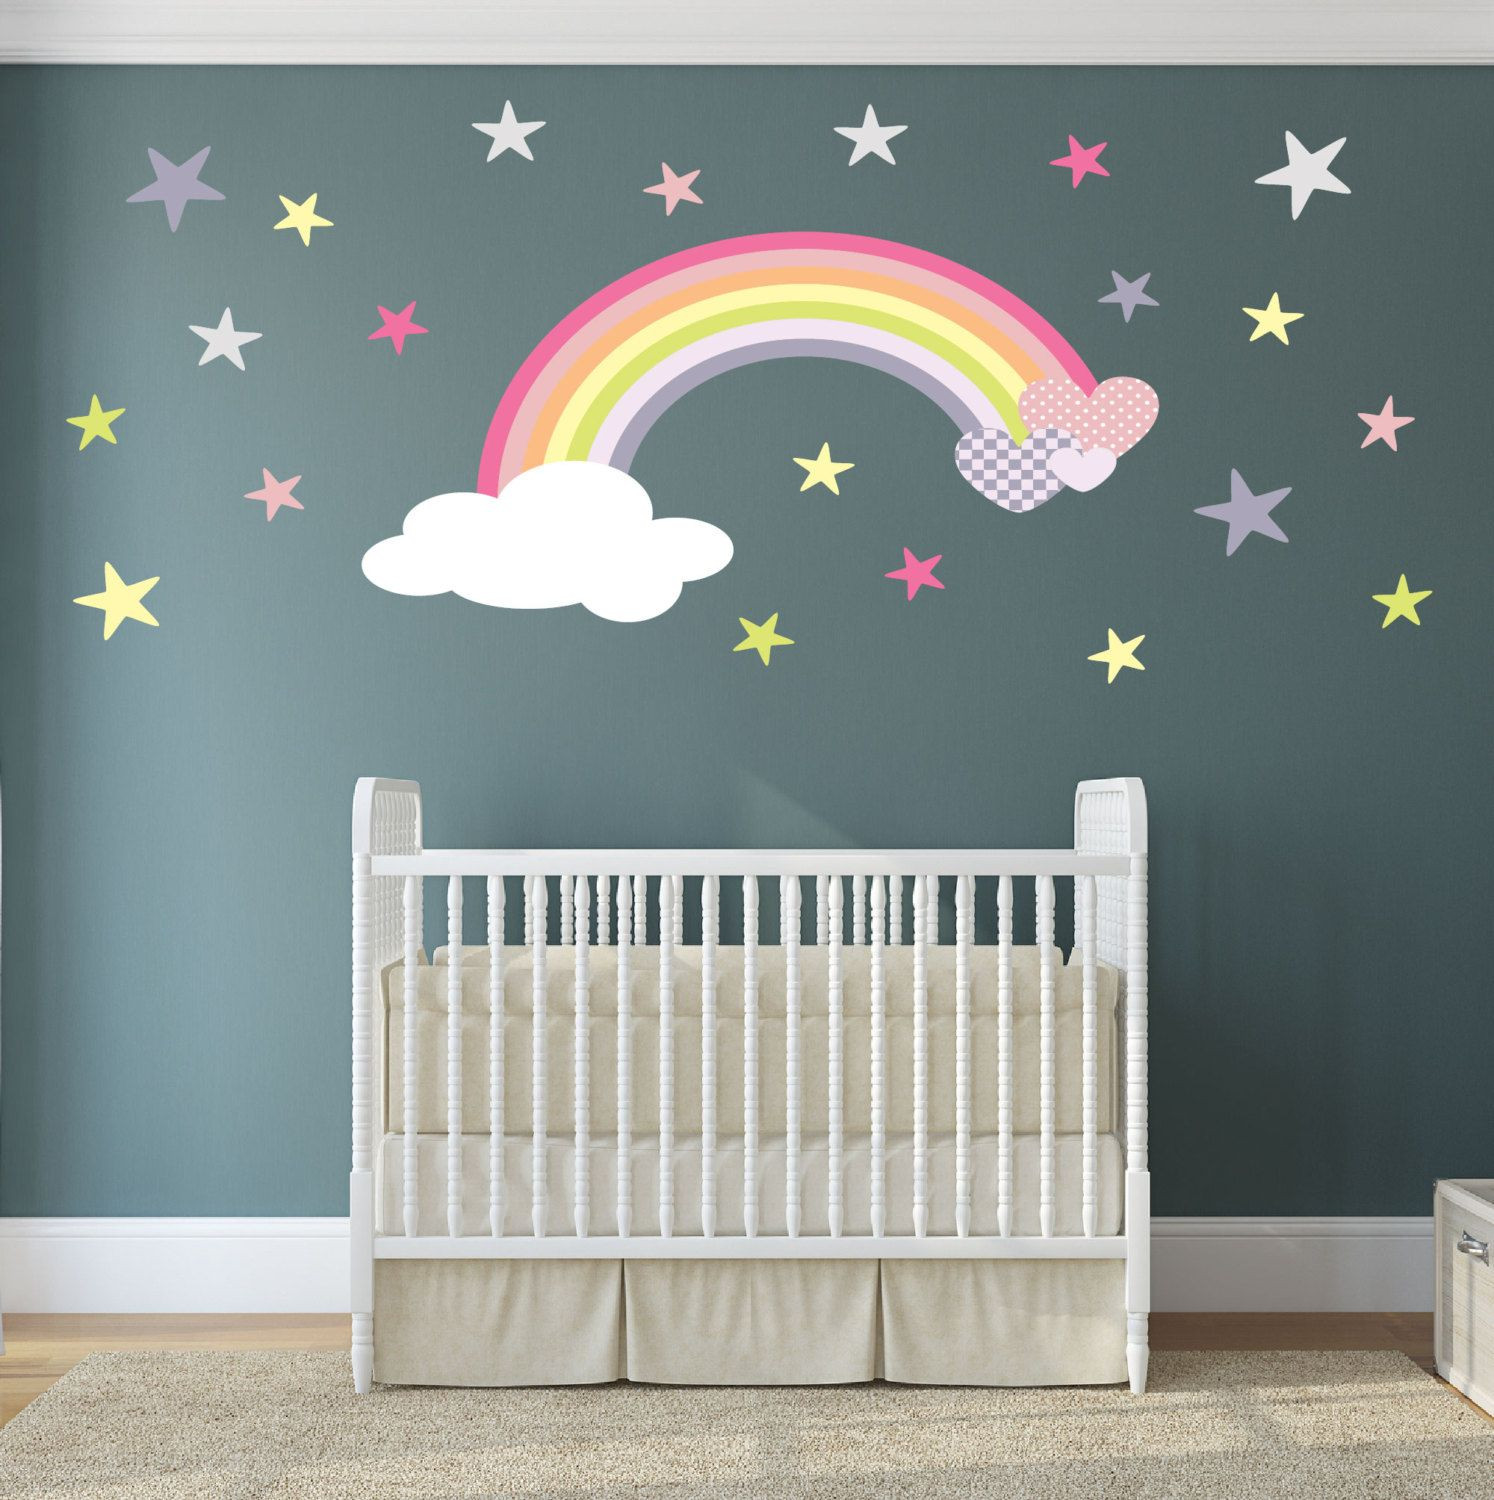 Baby Room Decoration Stickers
 Rainbow Wall Decal girls wall stickers nursery baby room